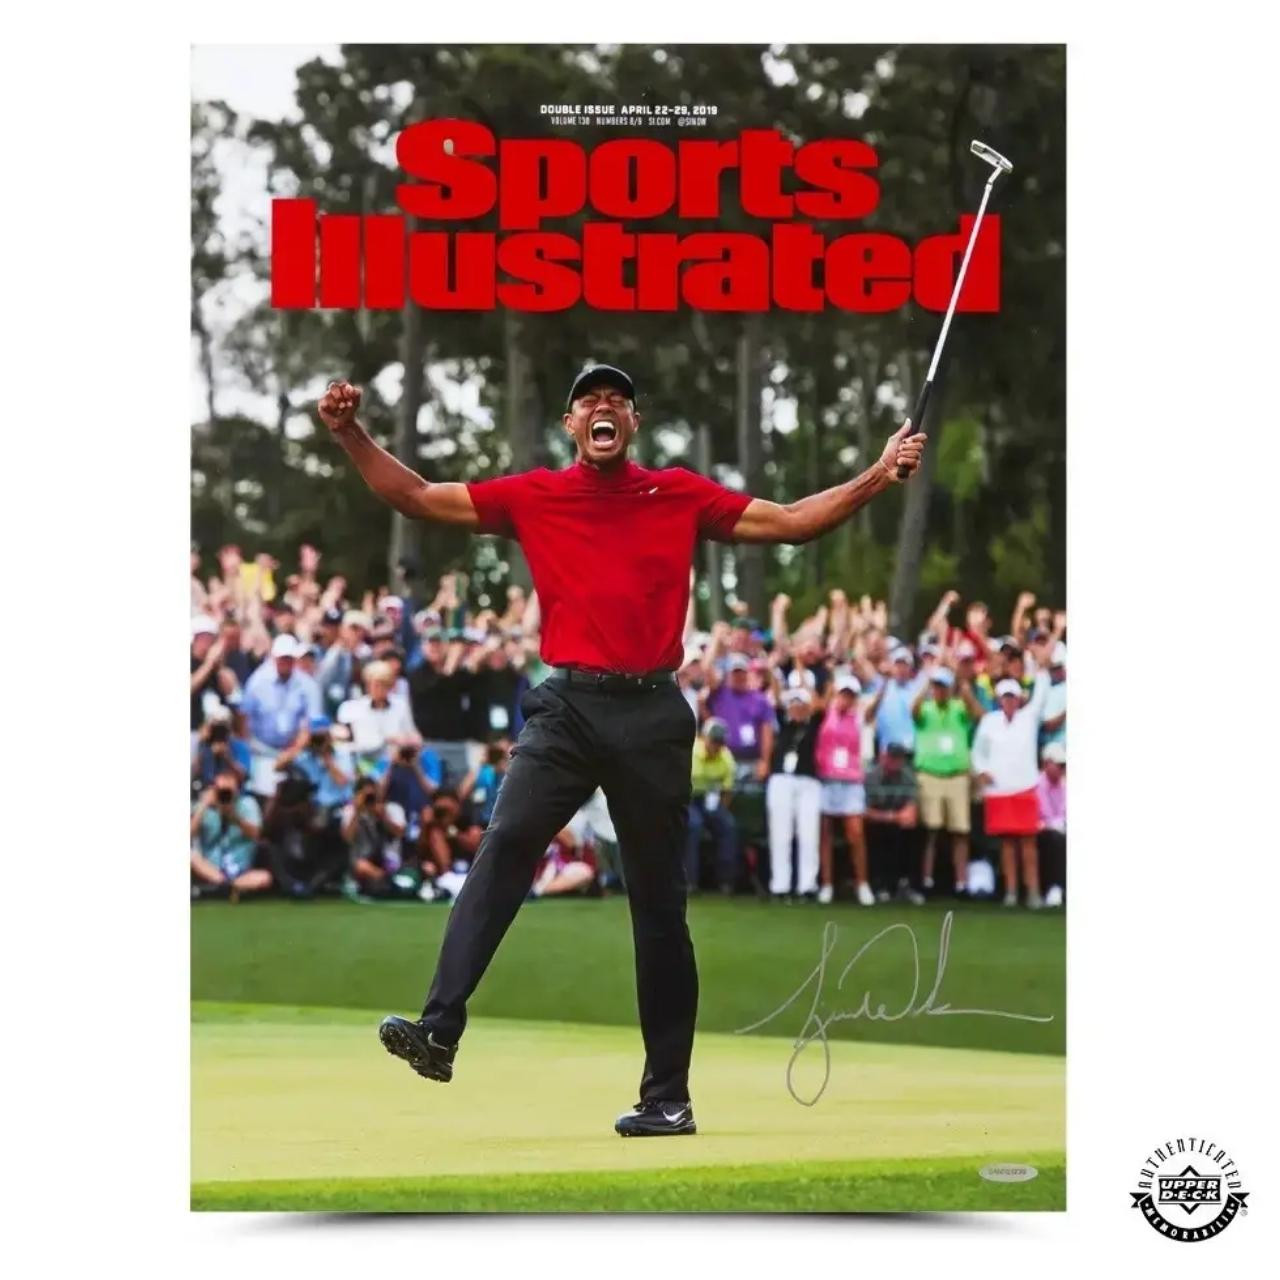 Authentic Tiger Woods Autographed Sports Illustrated Print 15x20 - 2019 Masters Champion Upper Deck Authenticated | Home & Office | Autographed Masters Merchandise | MMO Golf